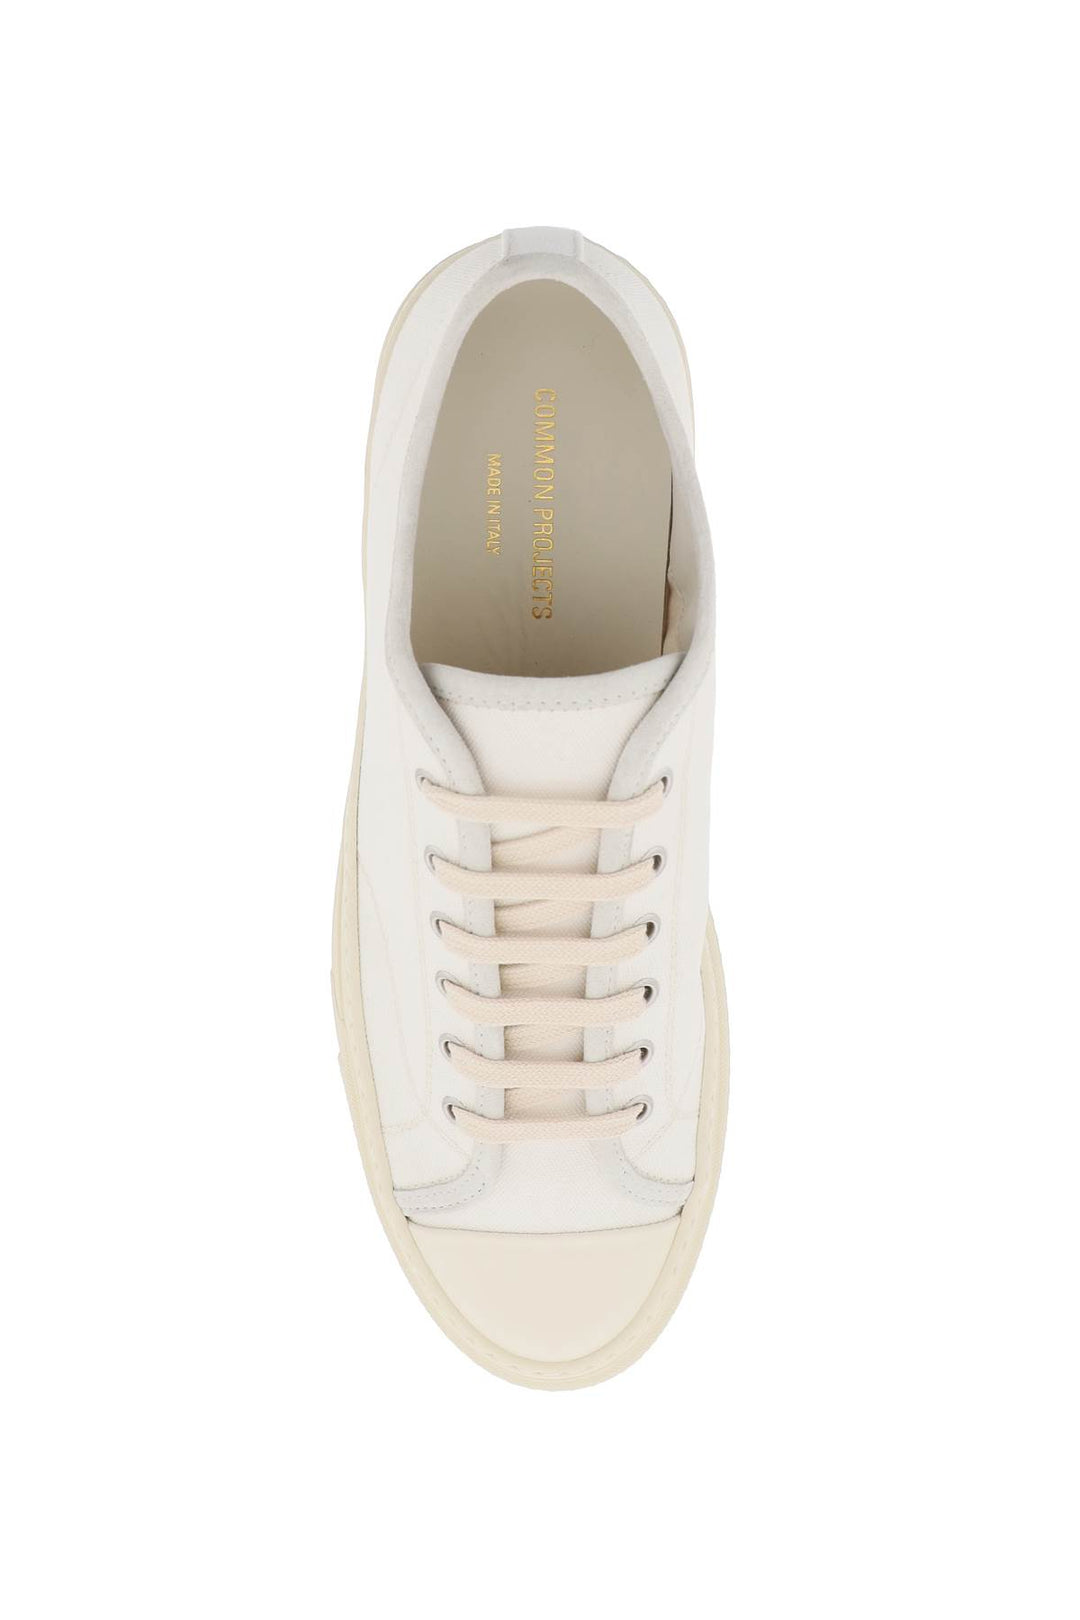 Common Projects Tournament Sneakers   Bianco